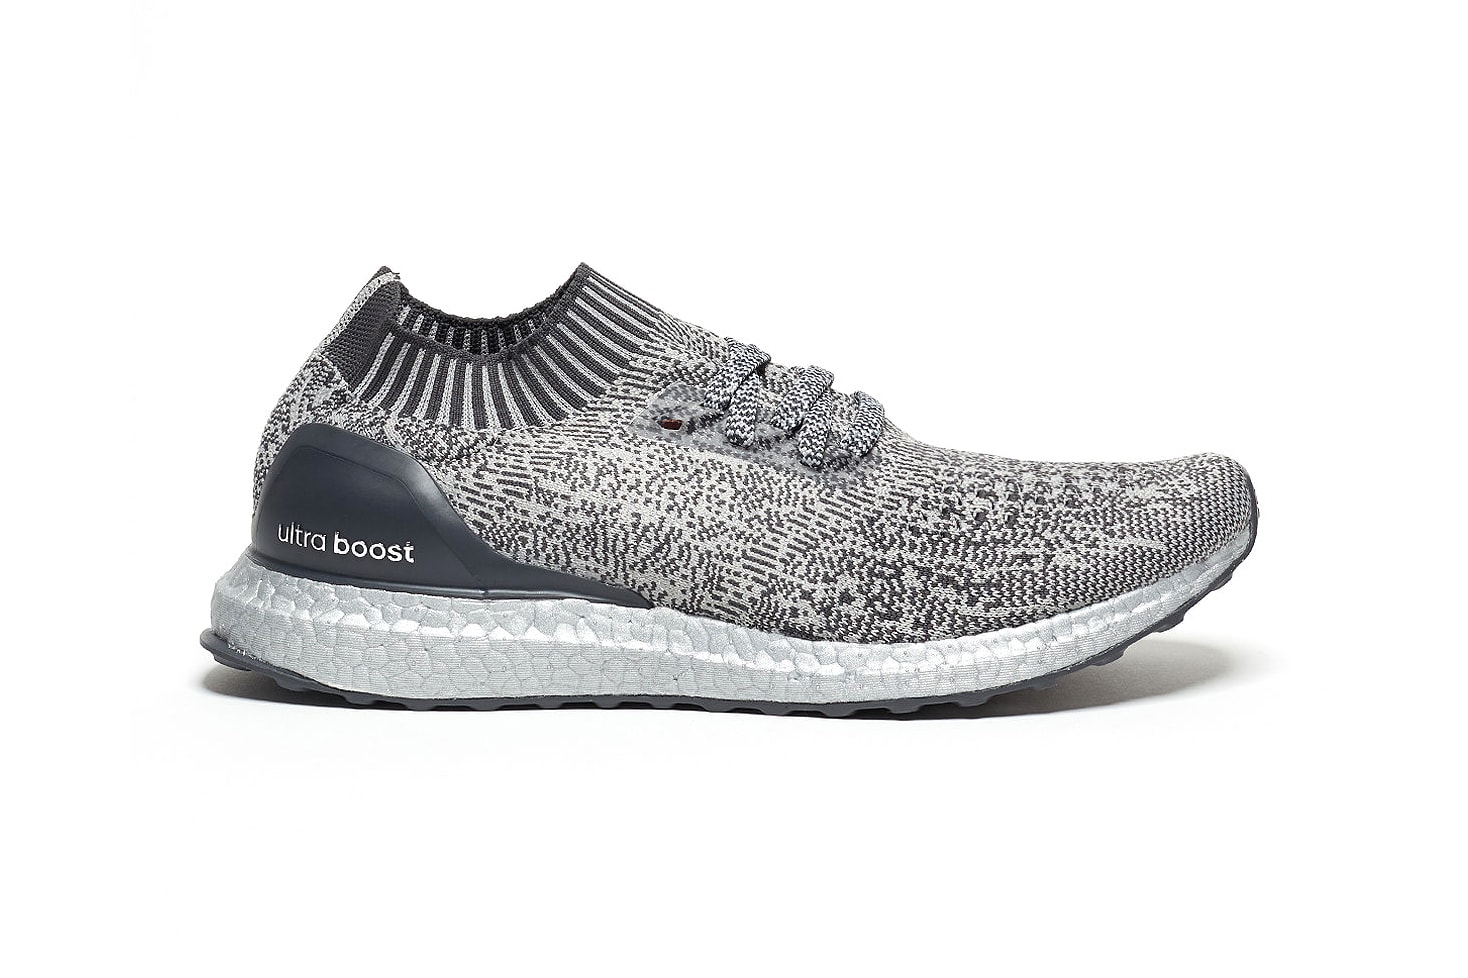 adidas UltraBOOST Uncaged "Silver" Date